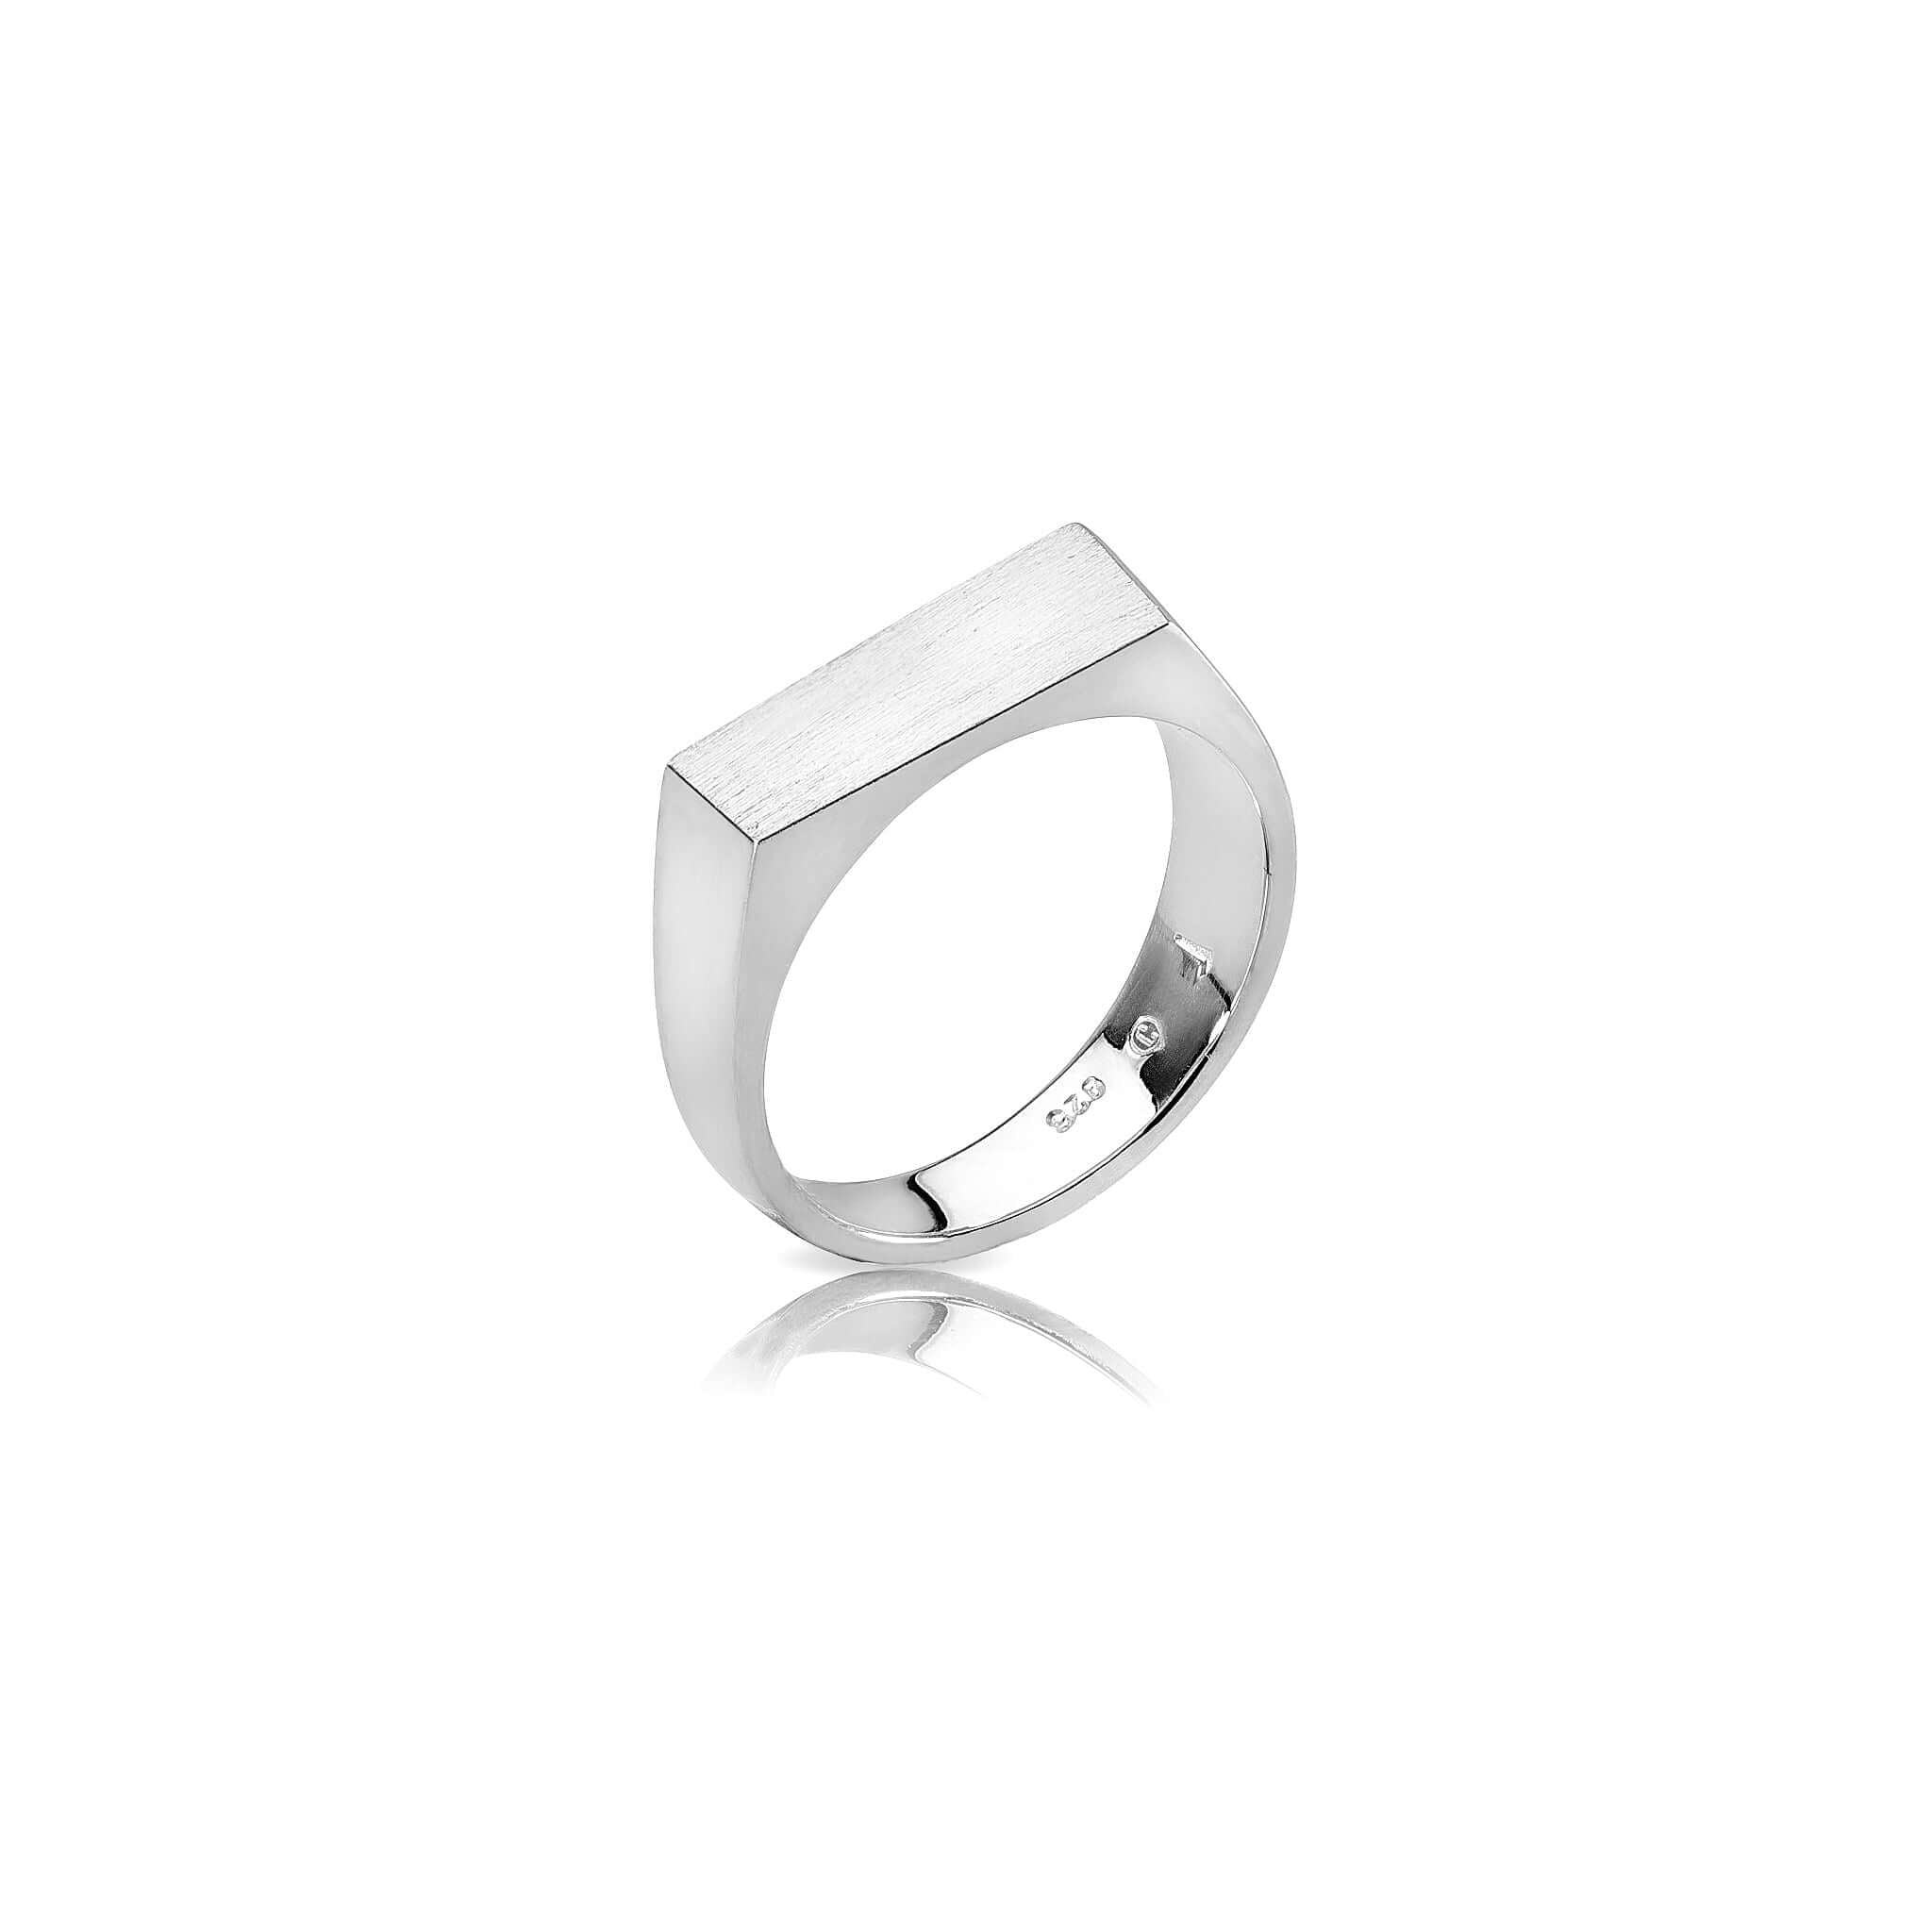 Signet ring inspired by the Pulpit Rock